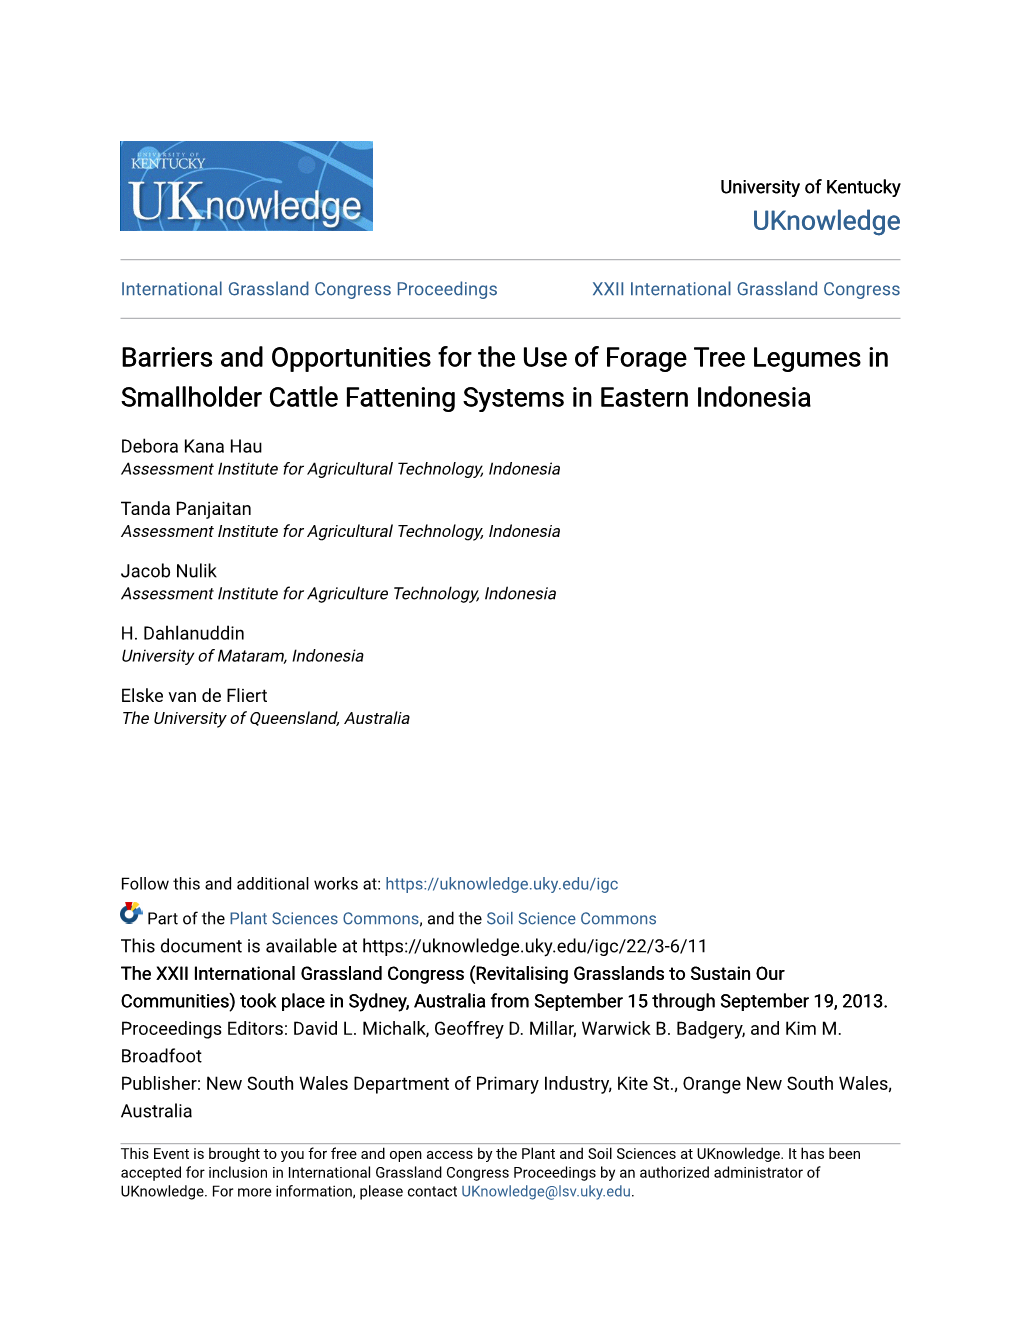 Barriers and Opportunities for the Use of Forage Tree Legumes in Smallholder Cattle Fattening Systems in Eastern Indonesia